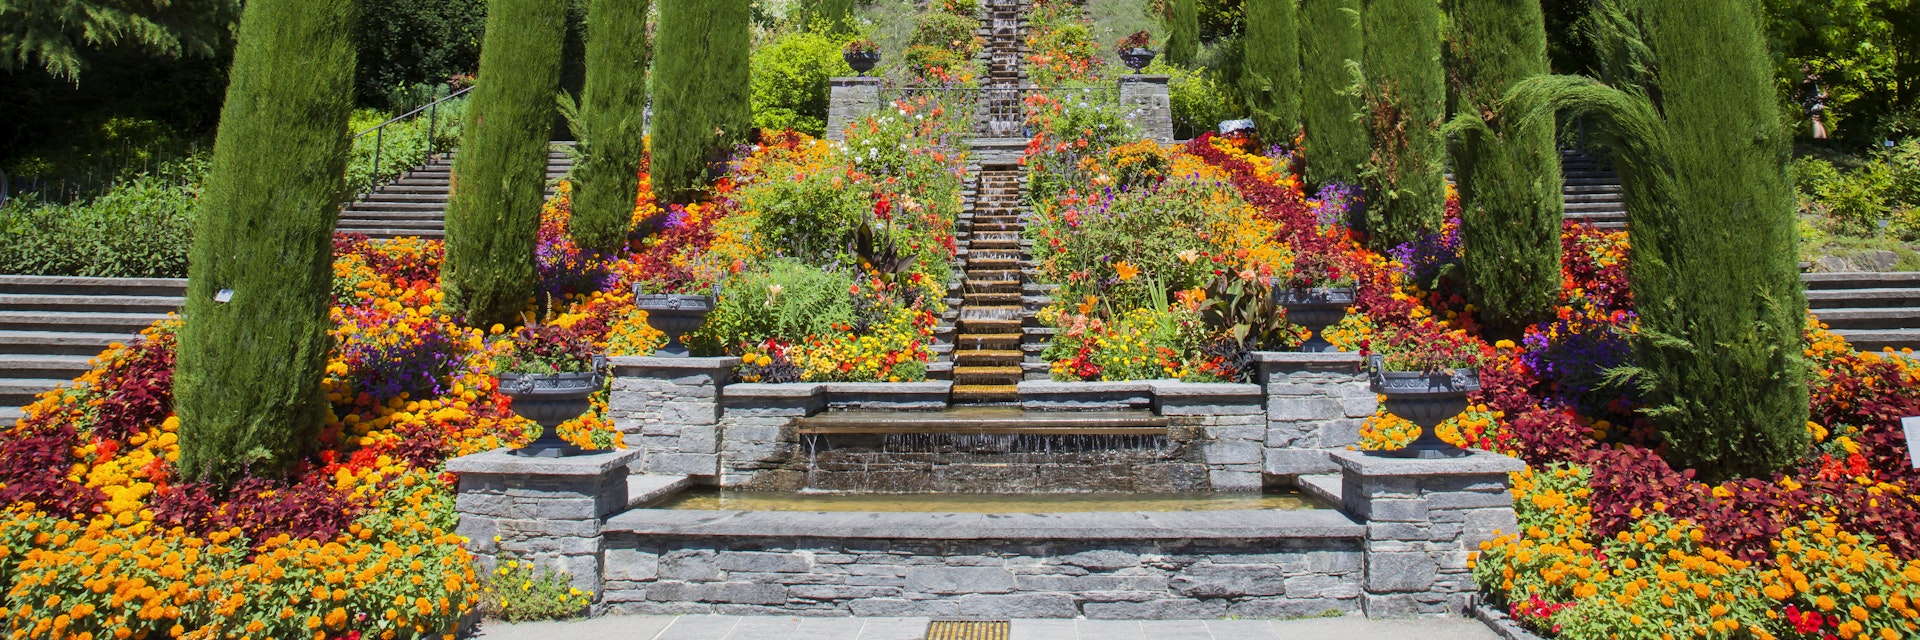 Italy Flower stairs and bed of flowers, Mainau Island, Baden-WÃ¼rttemberg, Germany, Europe
Italy Flower stairs and bed of flowers, Mainau Island, Baden-Württemberg, Germany, Europe
1496841157
baden-wurttemberg, central, constance, detail, federal, flowerstairs, german, liliaceae, mainau, middle, republic, southern, stair, süddeutschland, tulipa, baden, bloom, bloomer, border, daylight, daytime, decorative, deserted, exterior, flowering, flowers, green, herbaceous, incidental, one, ornamental, park, pompous, public, spring, stairs, württhemberg